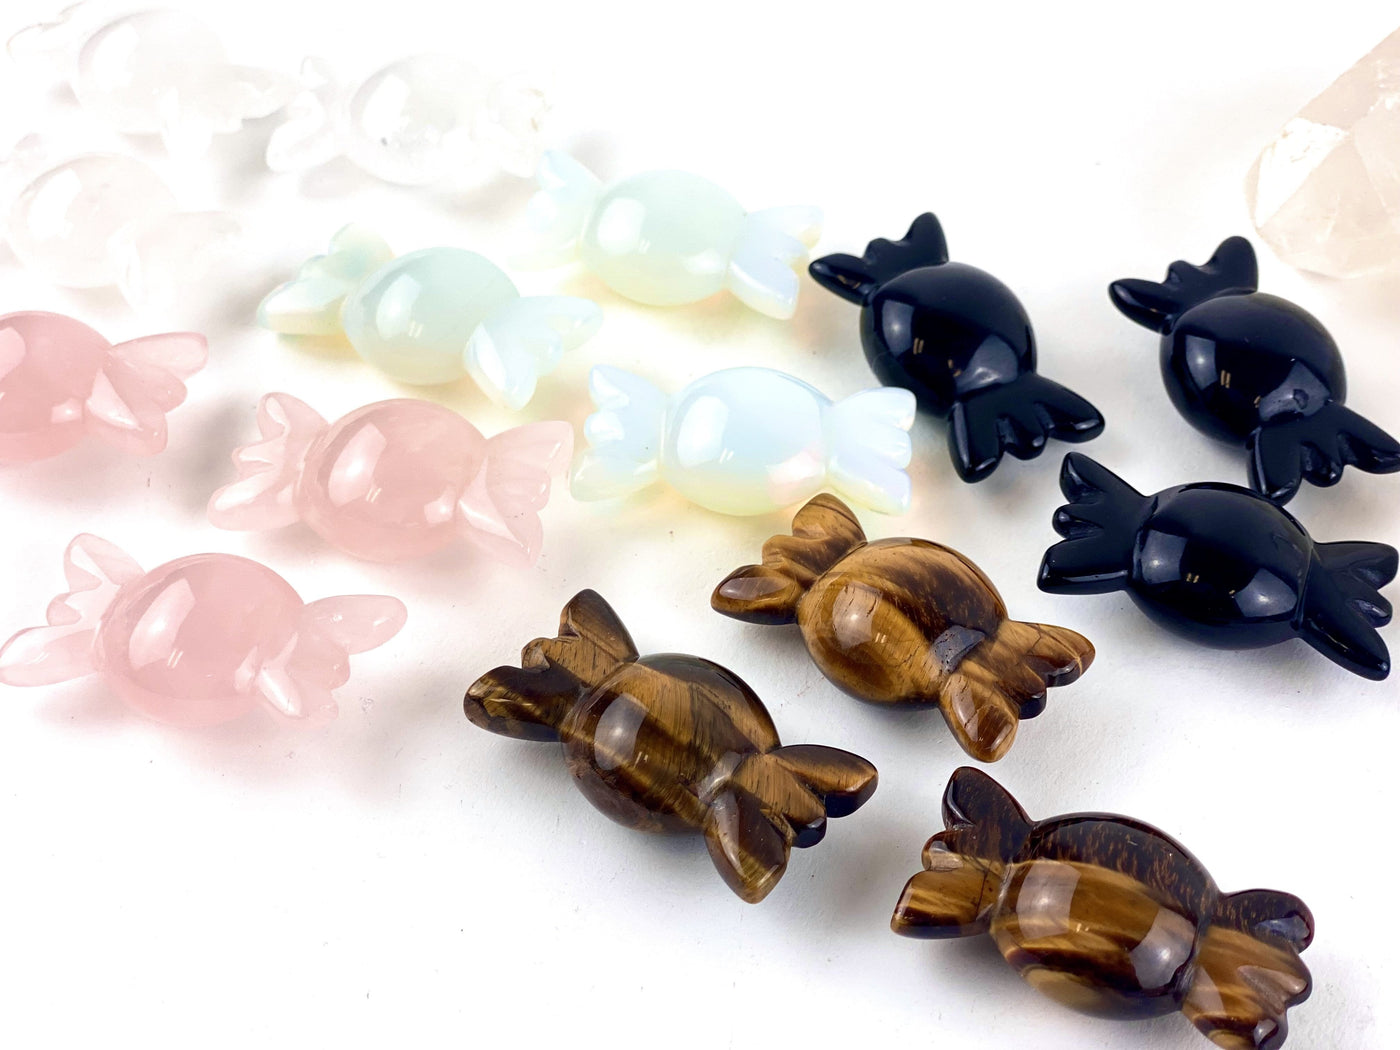 a side view of the Gemstone Candies to show thickness